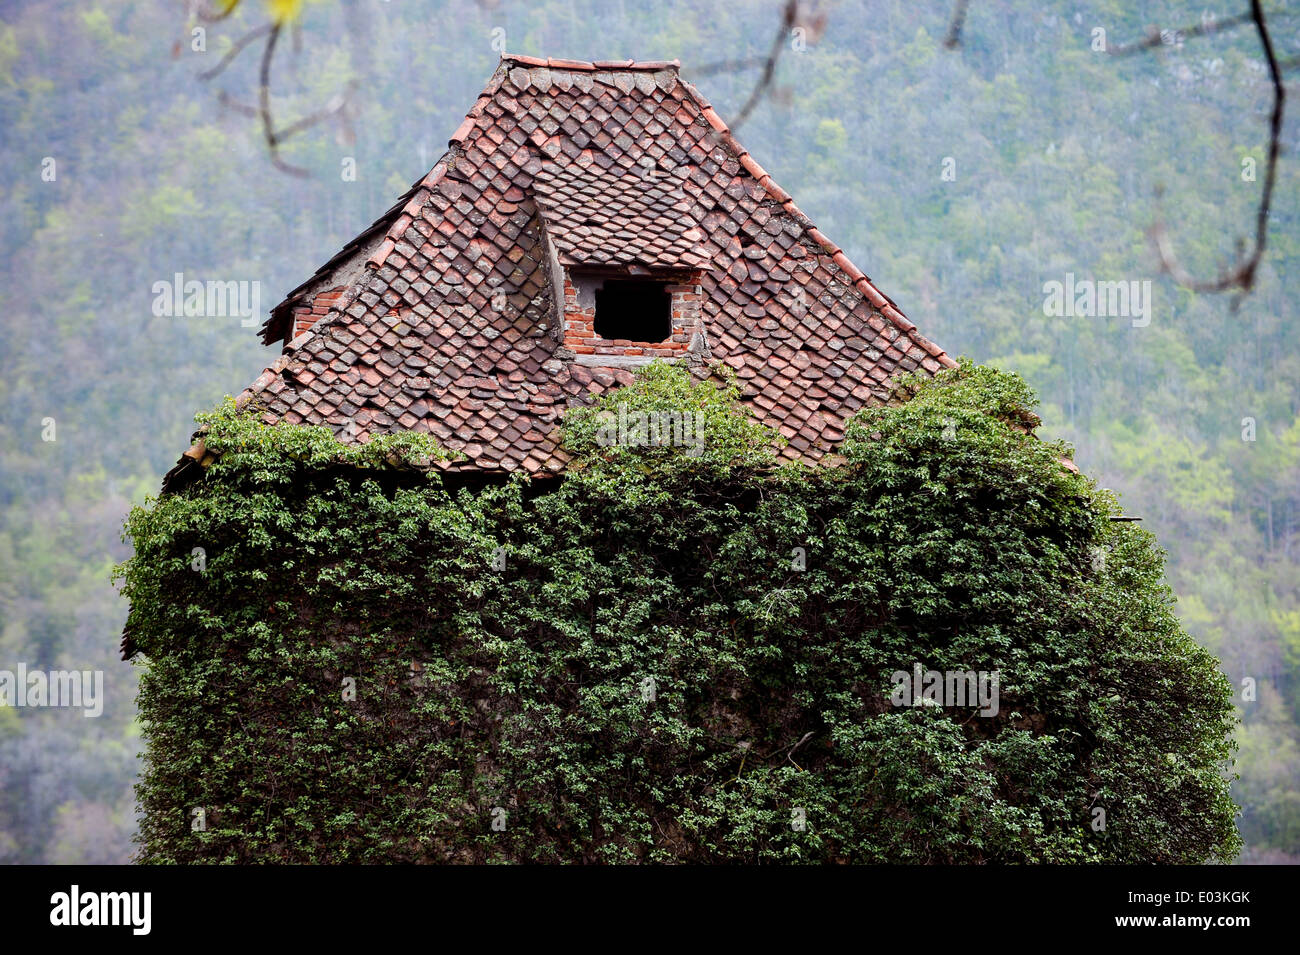 Abandoned old tower house with overgrown ivy Stock Photo